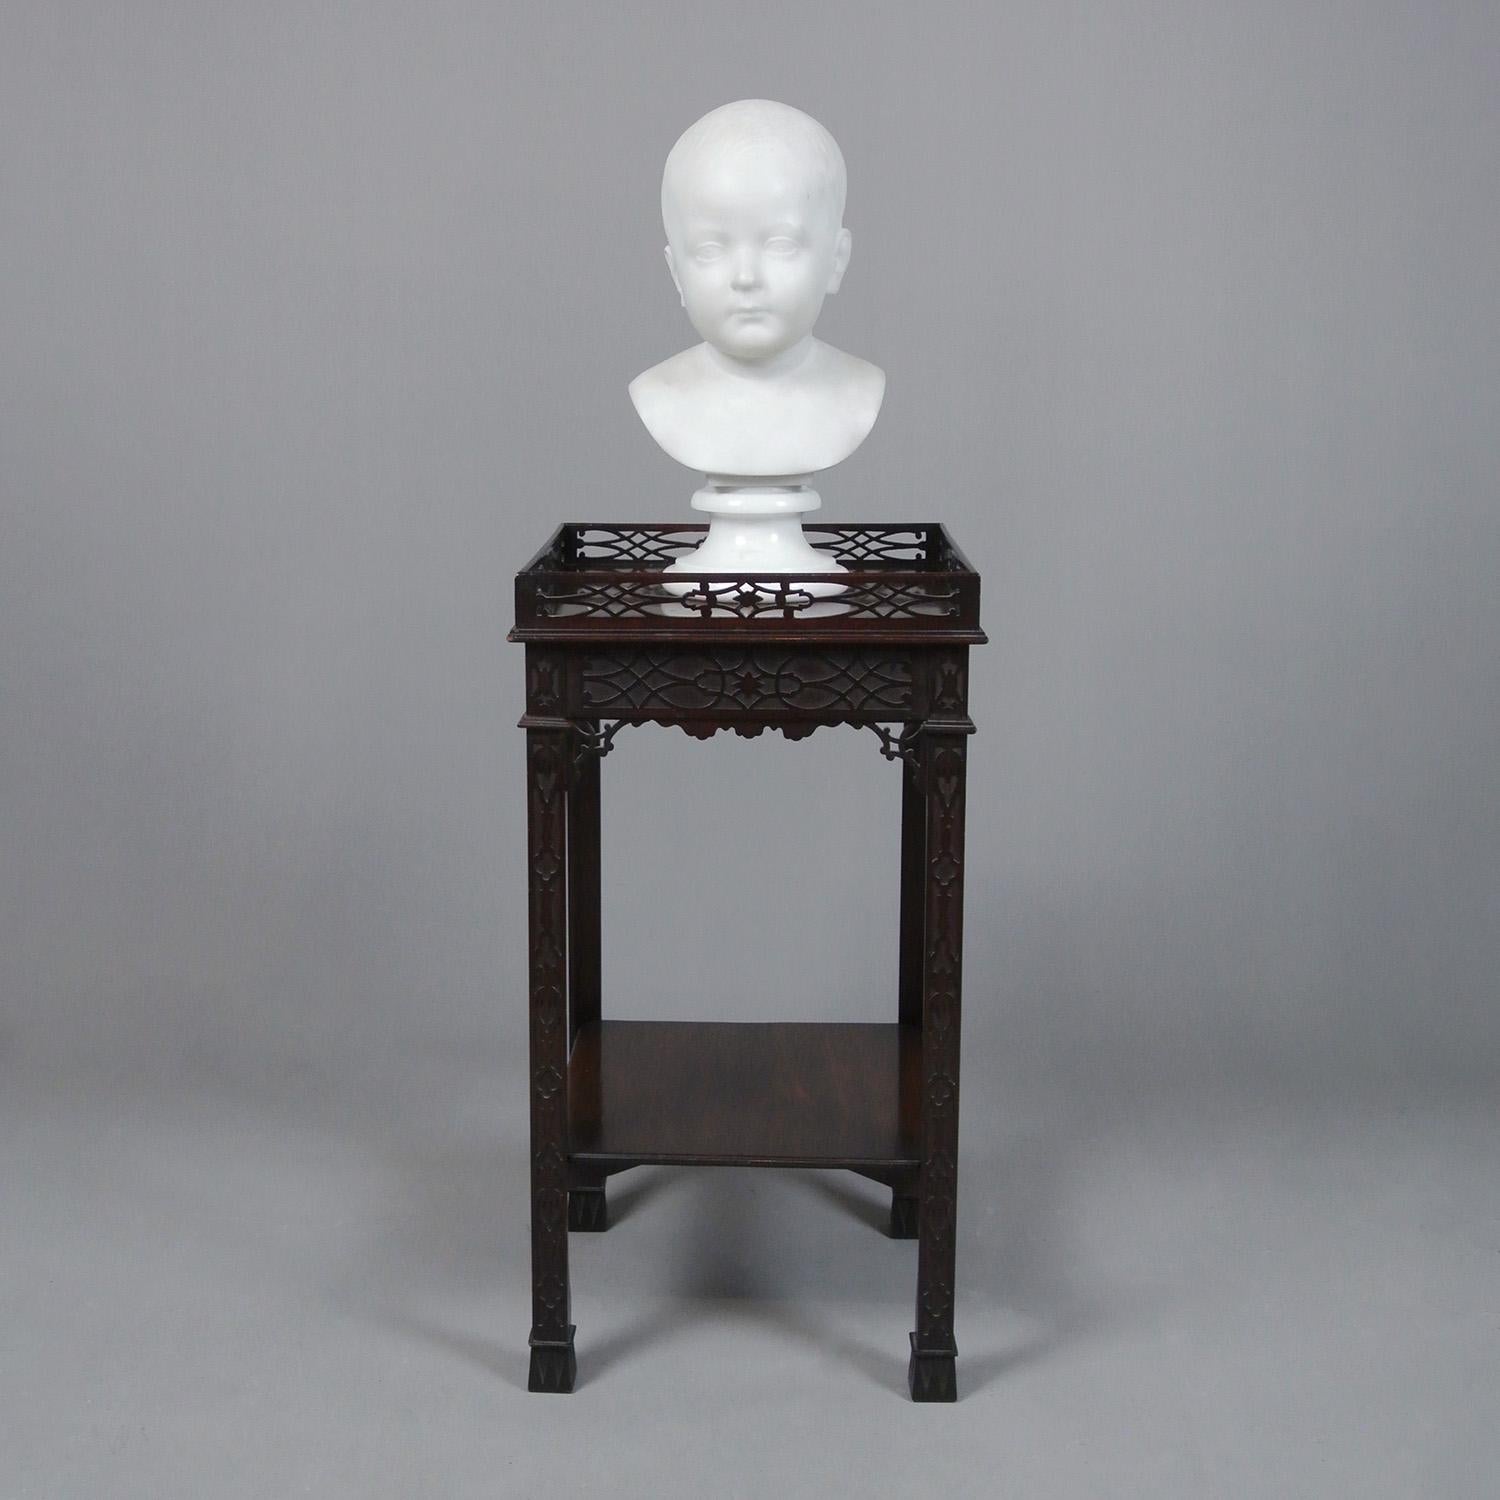 In 1880 William Brodie exhibited a marble bust of his daughter at the Royal Scottish Academy. Another bust of the same child, also signed by Brodie, was sold by Sothebys and differs only in that the child is wearing a smock type garment. This bust